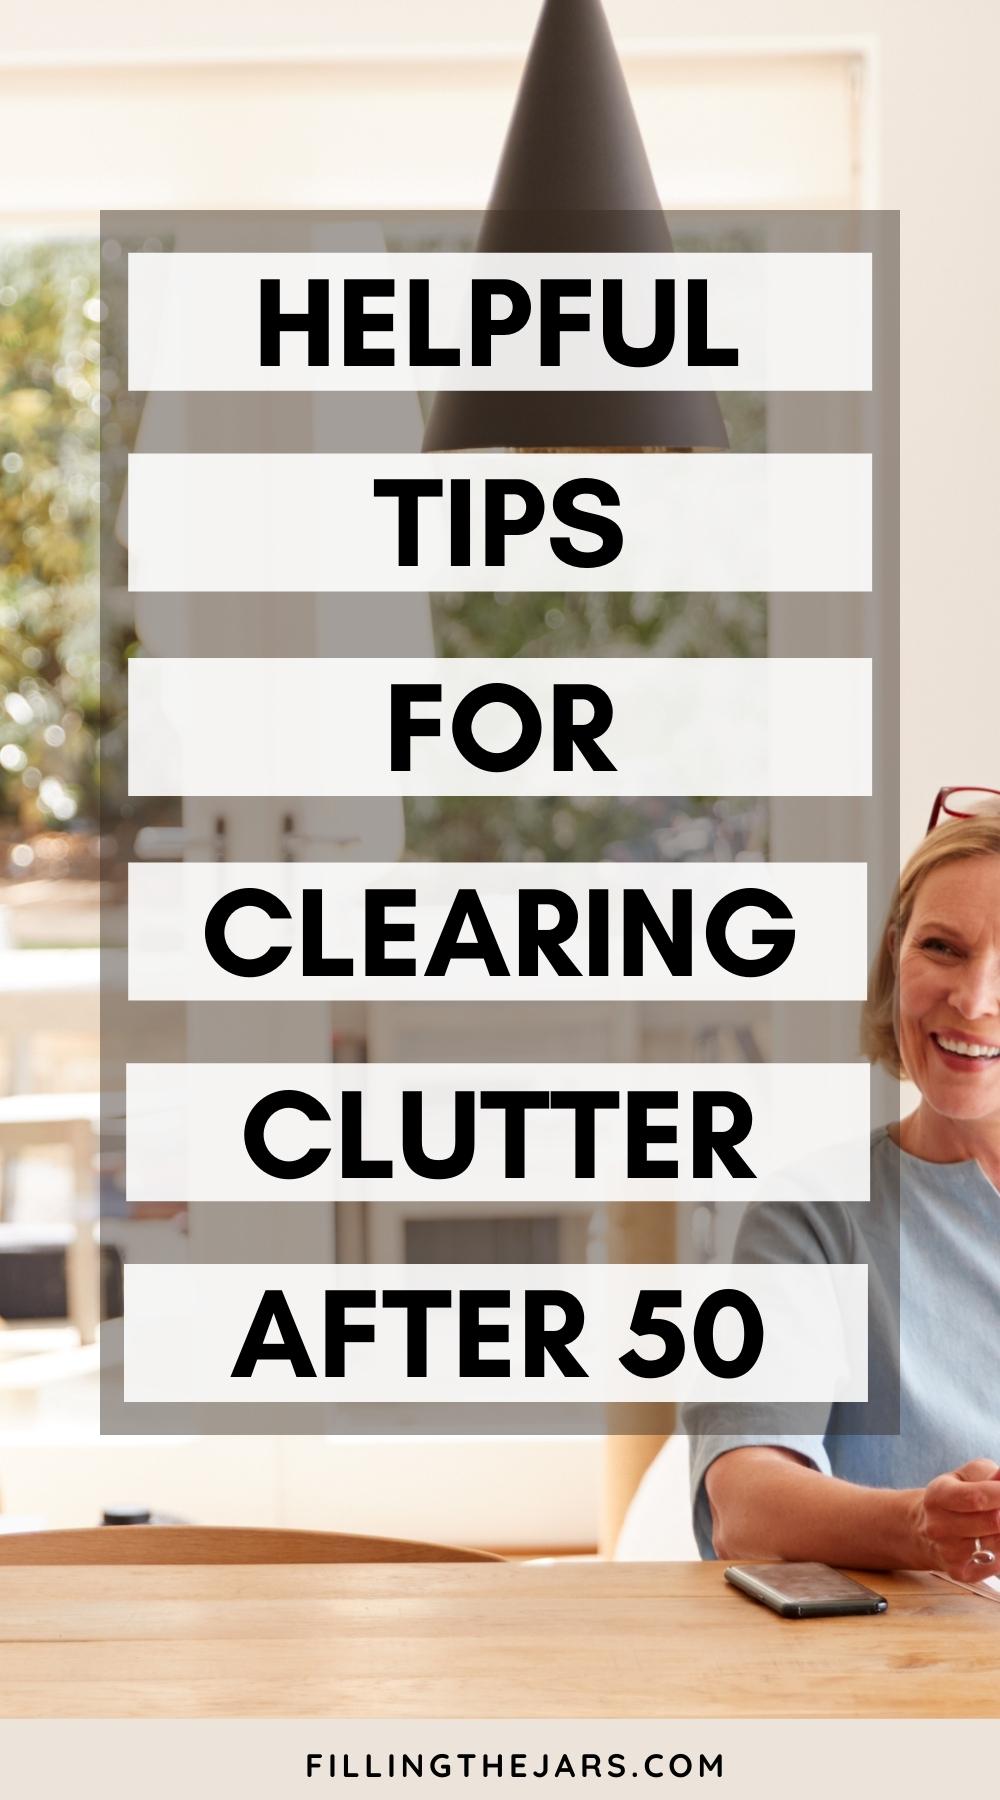 Text helpful tips for clearing clutter after 50 on white background squares over image of smiling midlife woman in beautiful home.